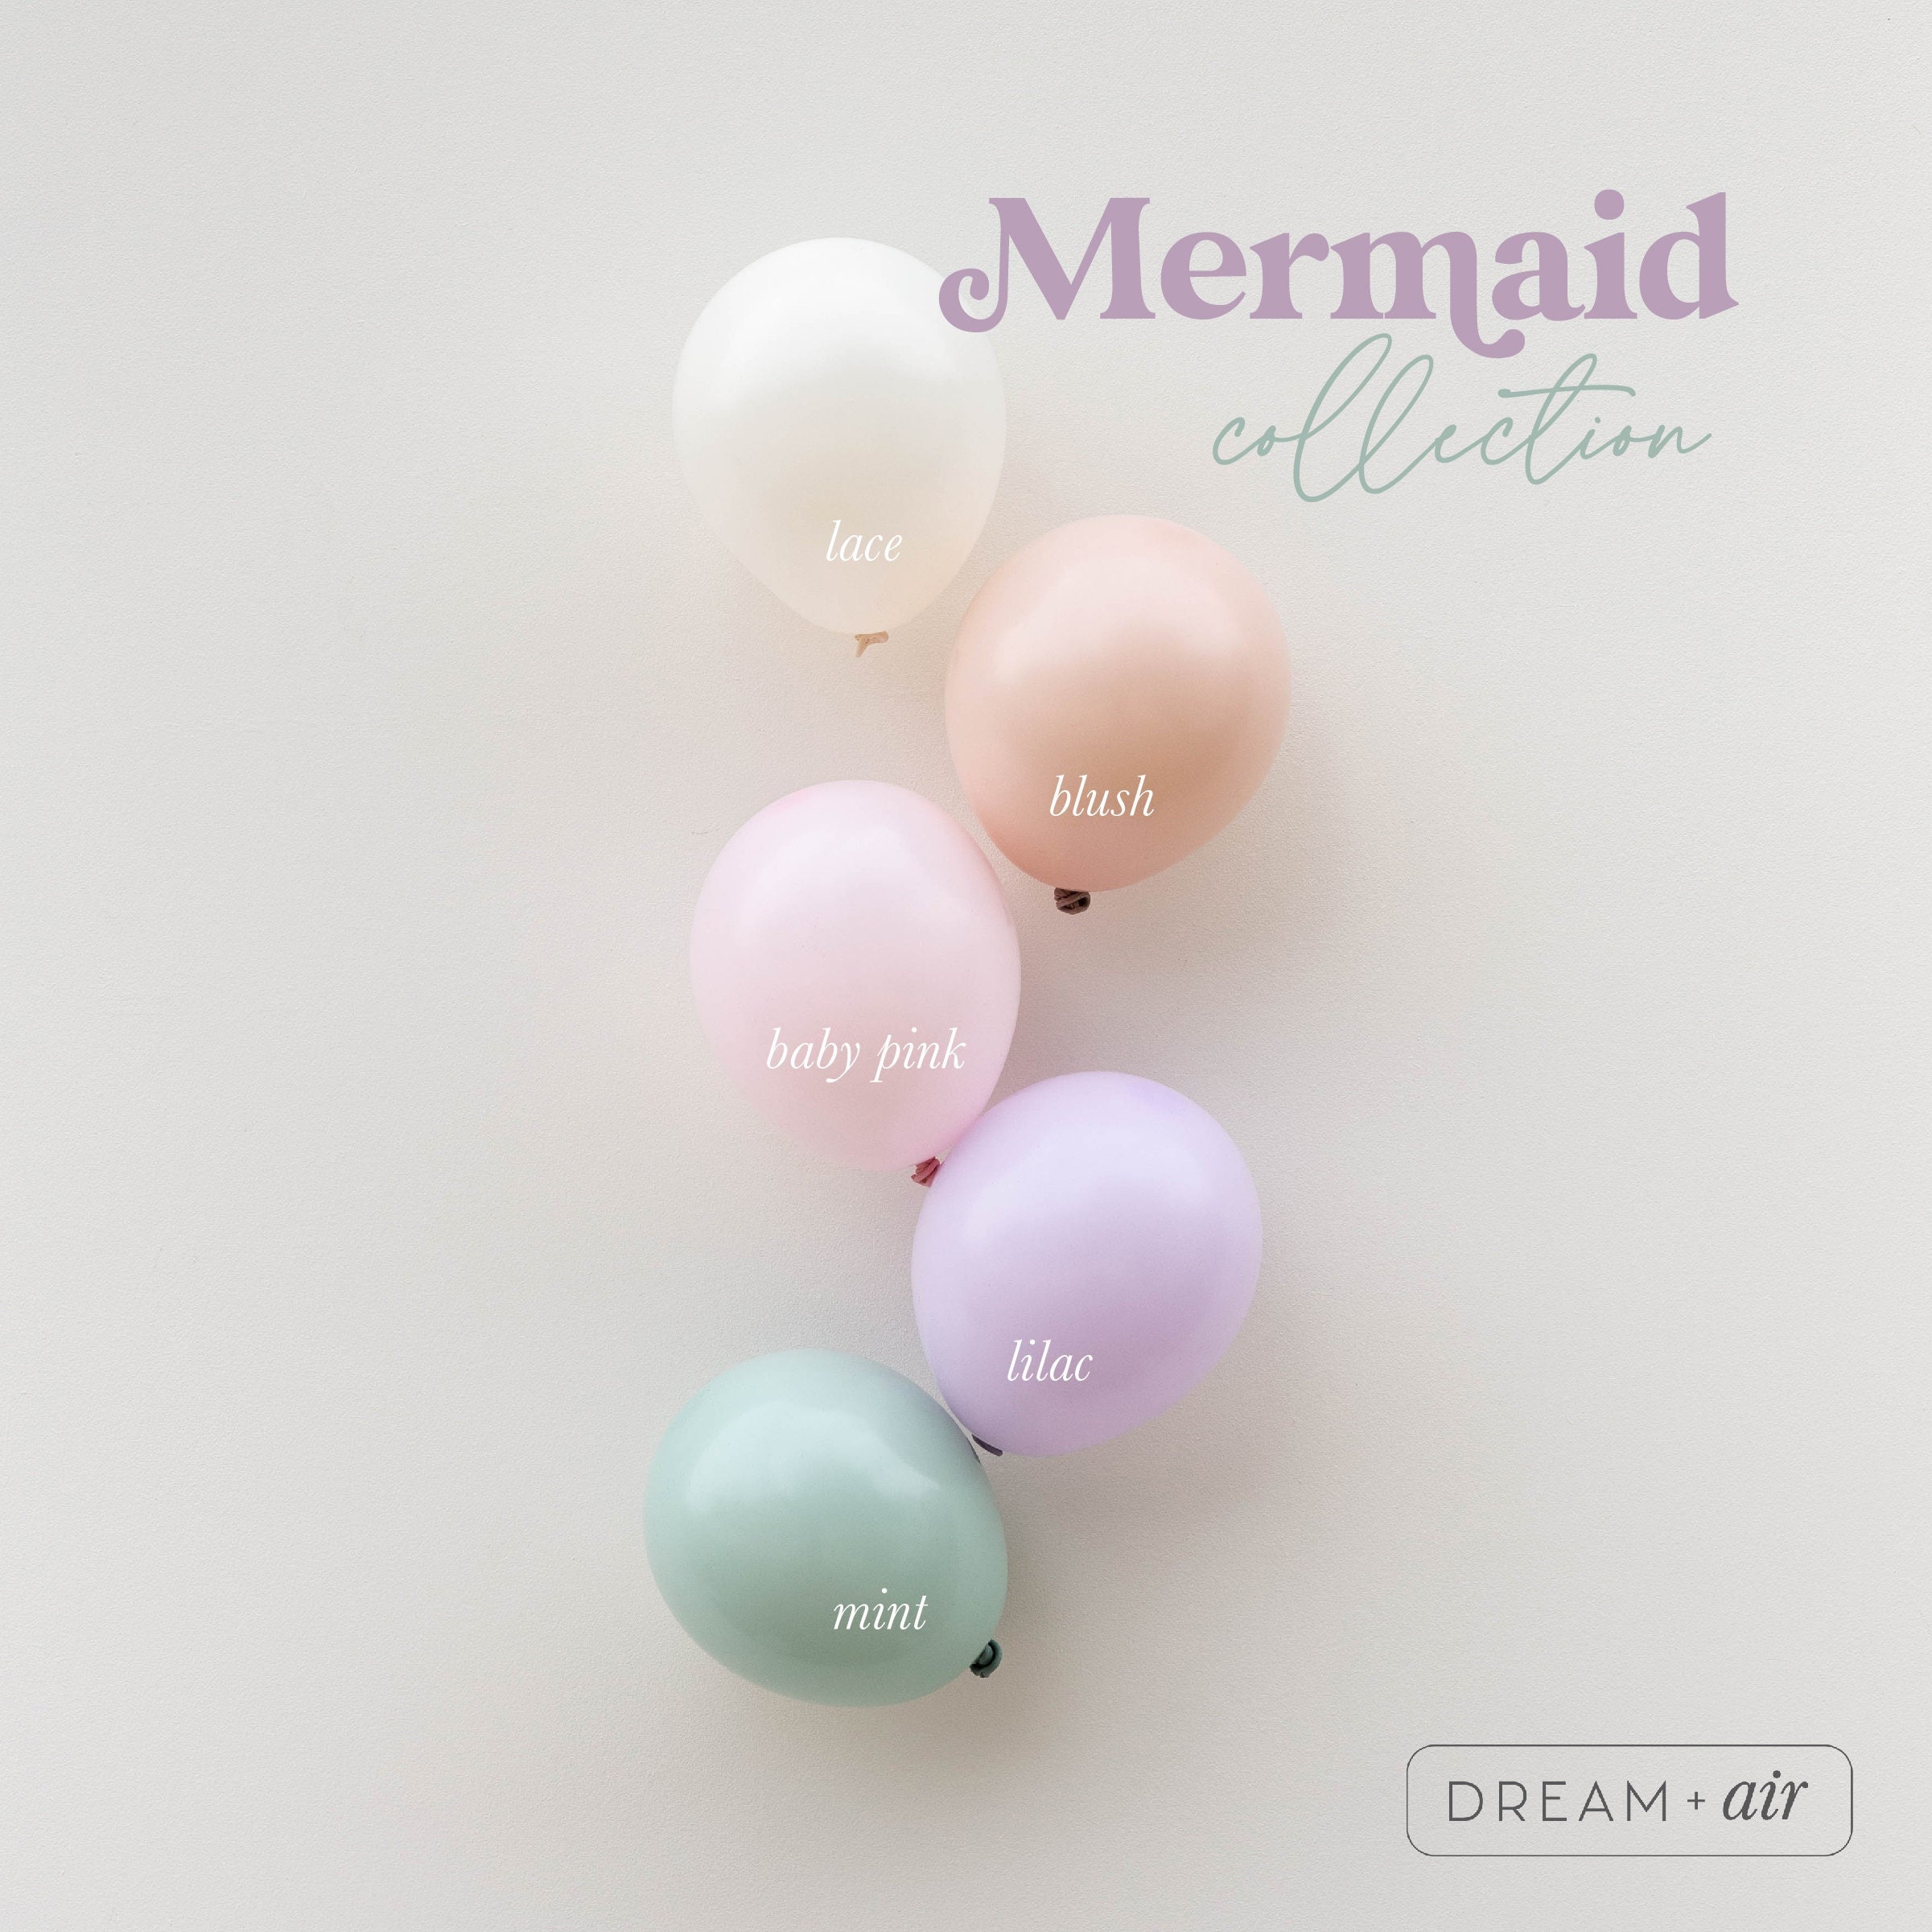 Pink Lilac Pastel Tissue Paper Disc Party Backdrop, Mermaid Party